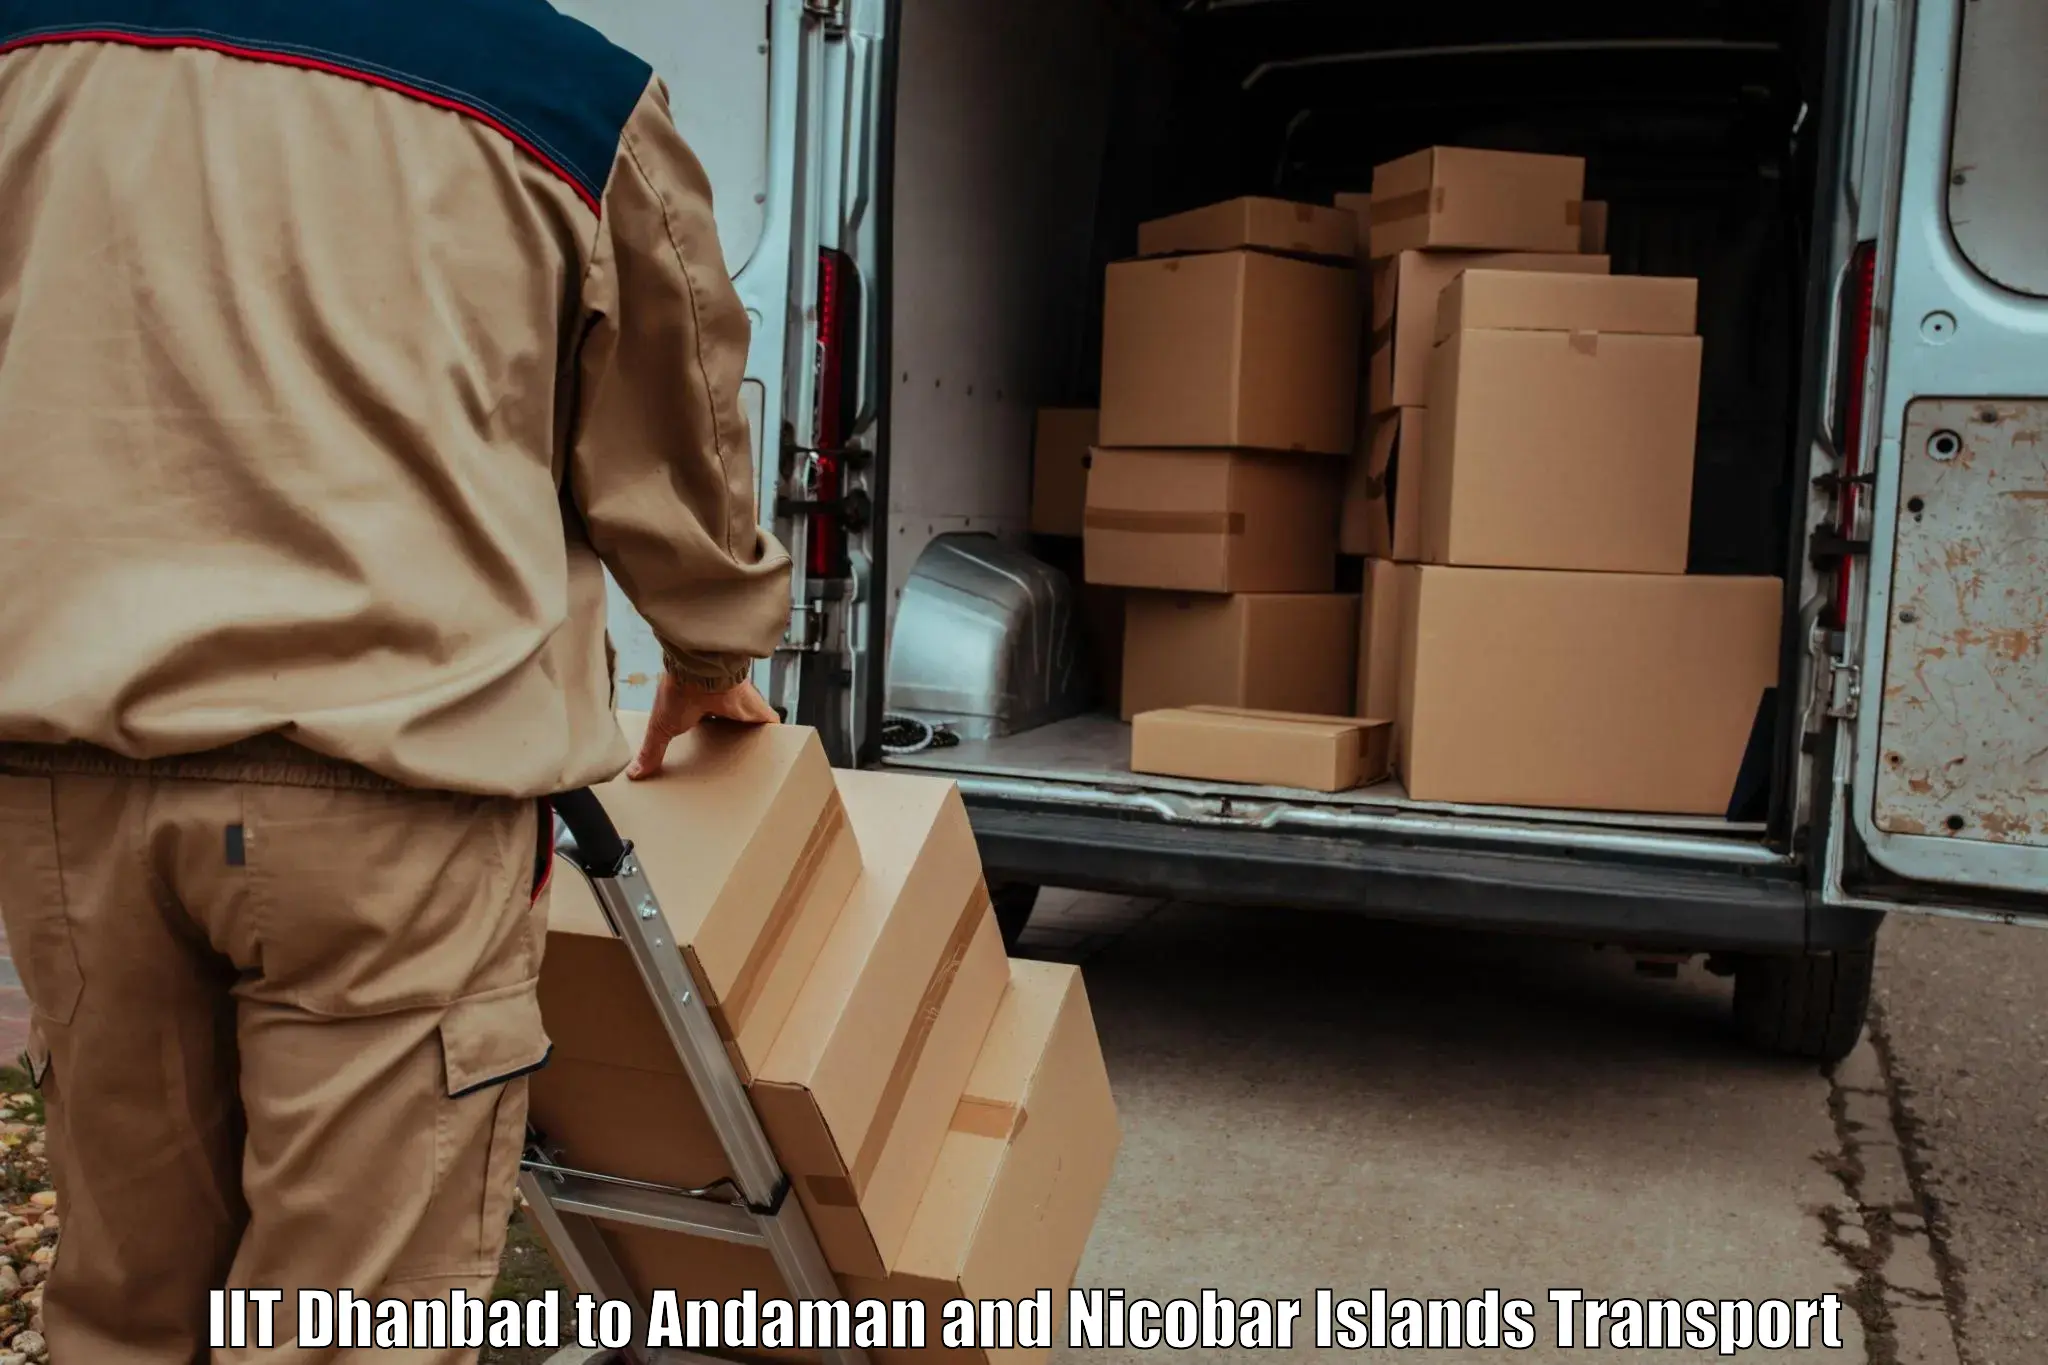 Interstate goods transport IIT Dhanbad to South Andaman